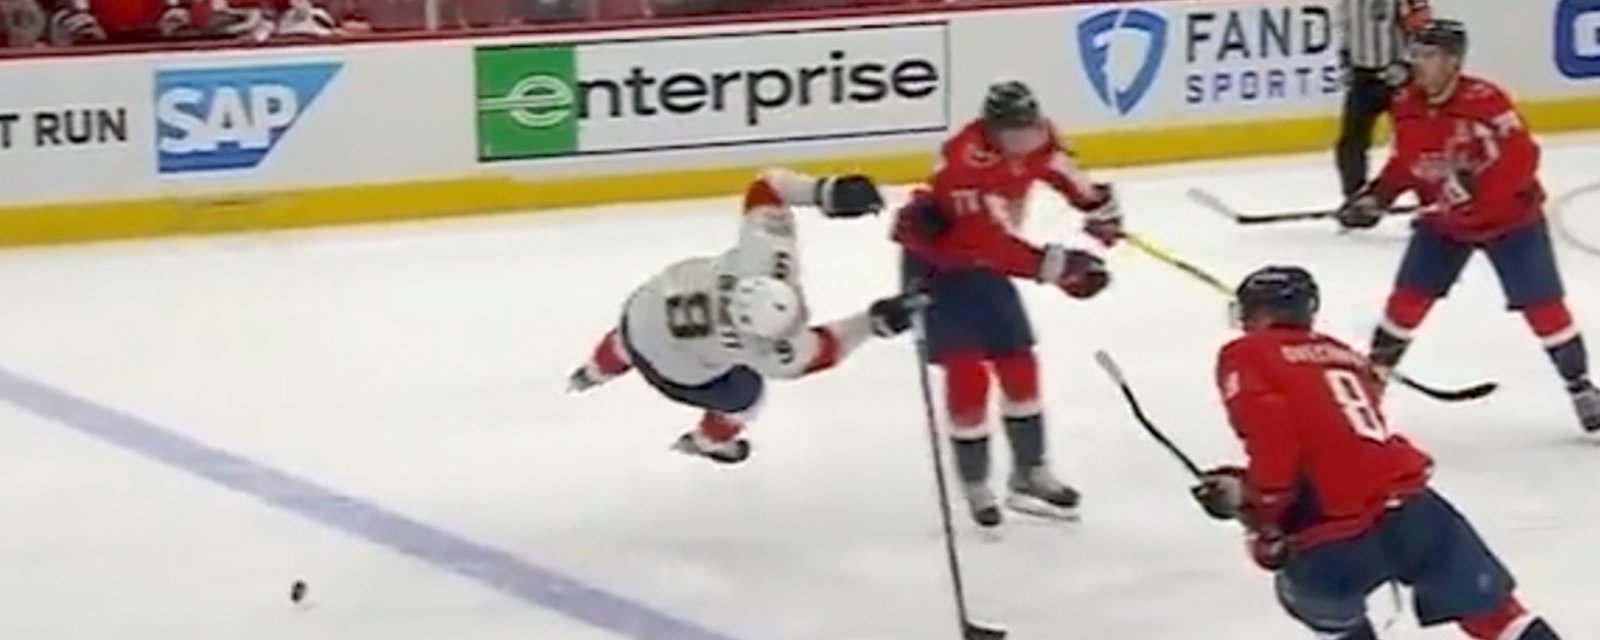 LOOK: Borderline hit by T.J. Oshie leads directly to Caps go-ahead goal! 